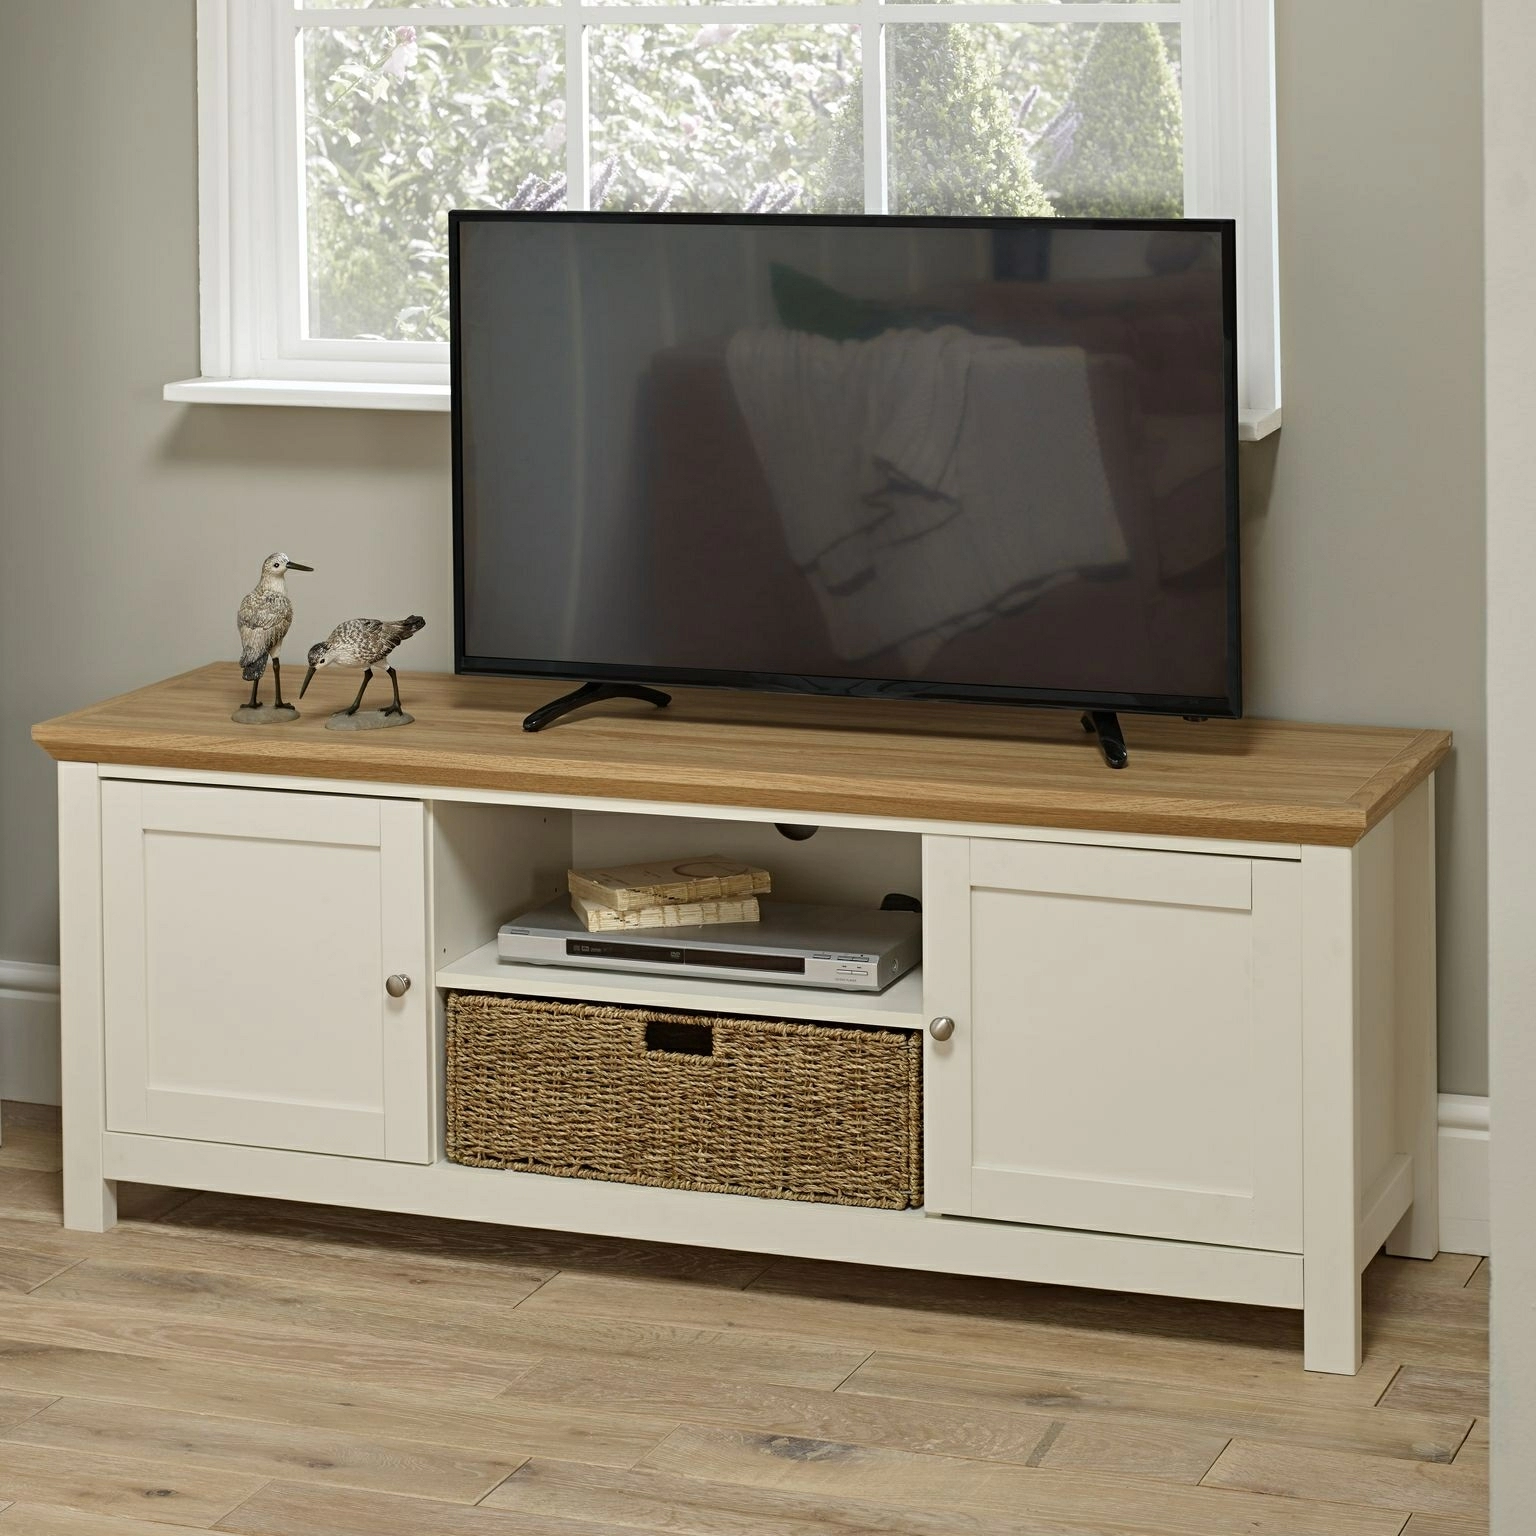 Simple Traditional Wooden TV Unit with Rattan Basket